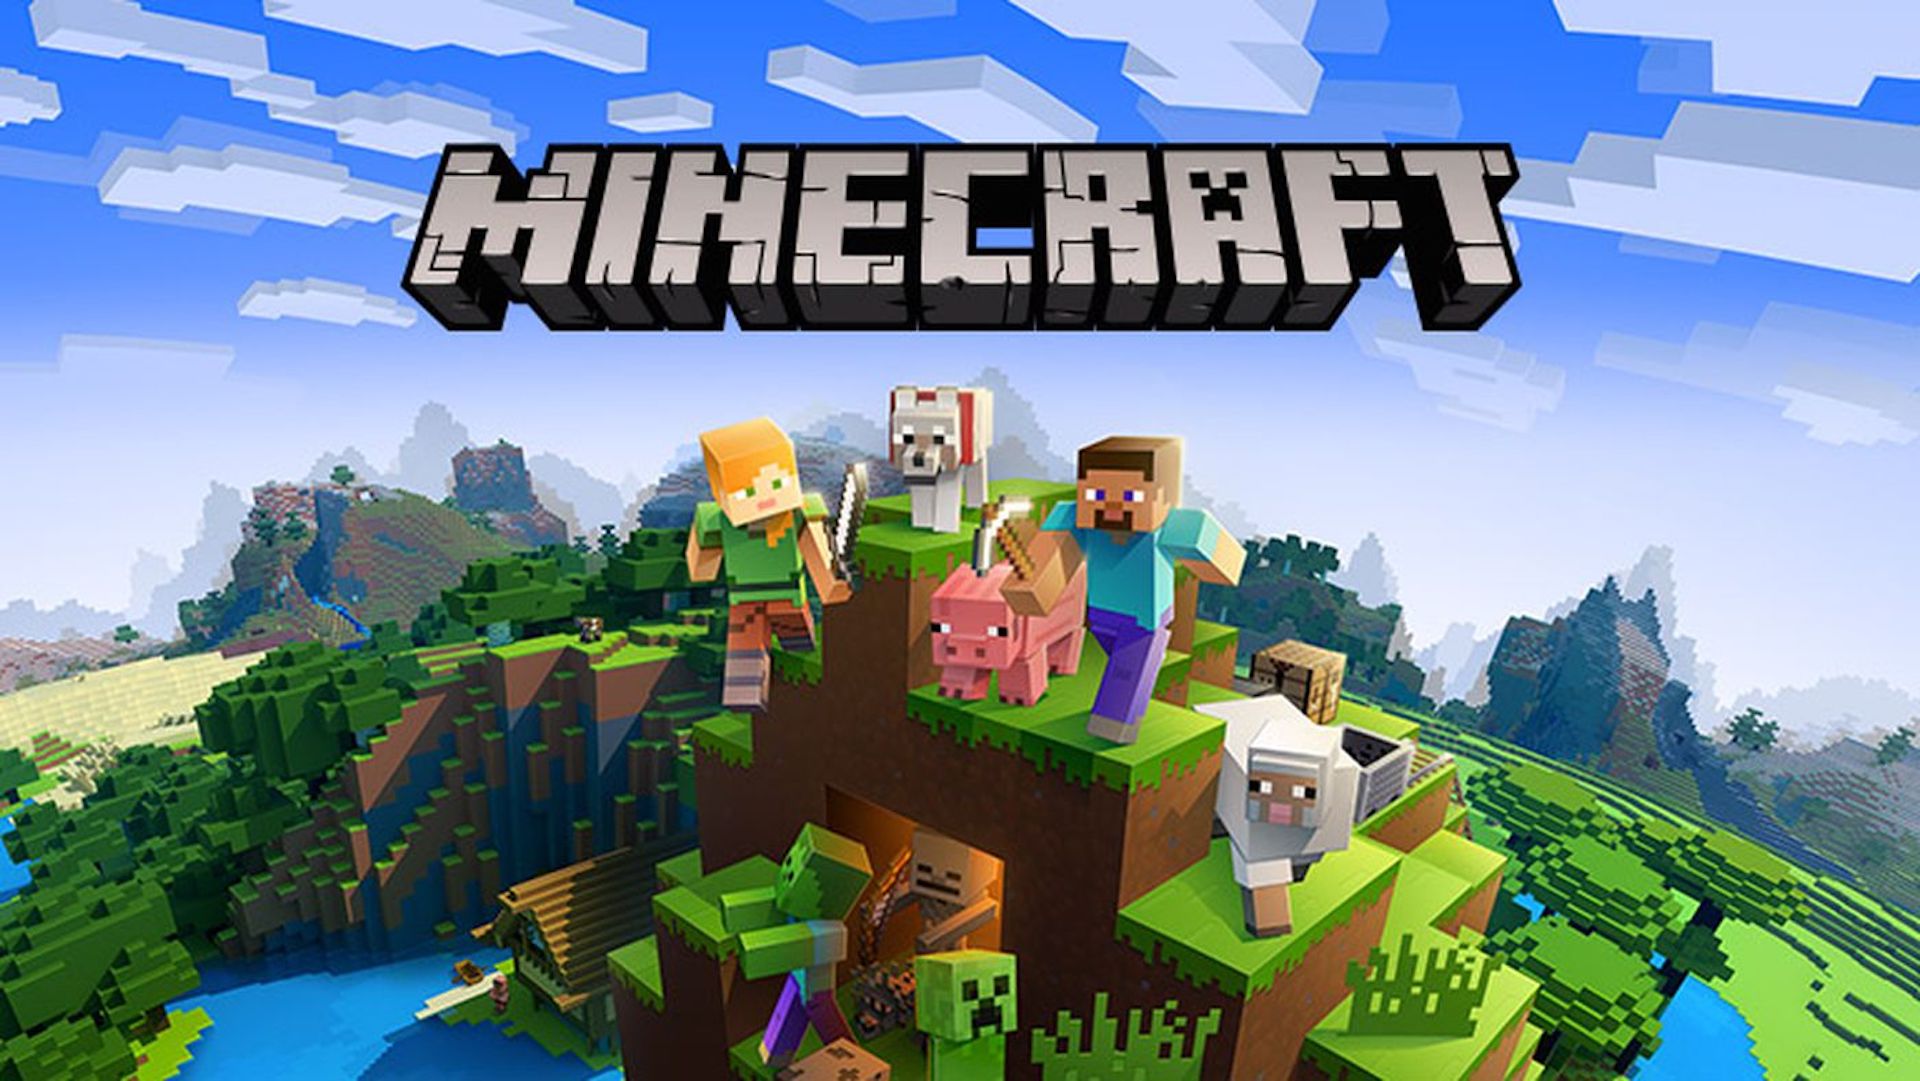 Rumour: Minecraft may be coming to PlayStation 5